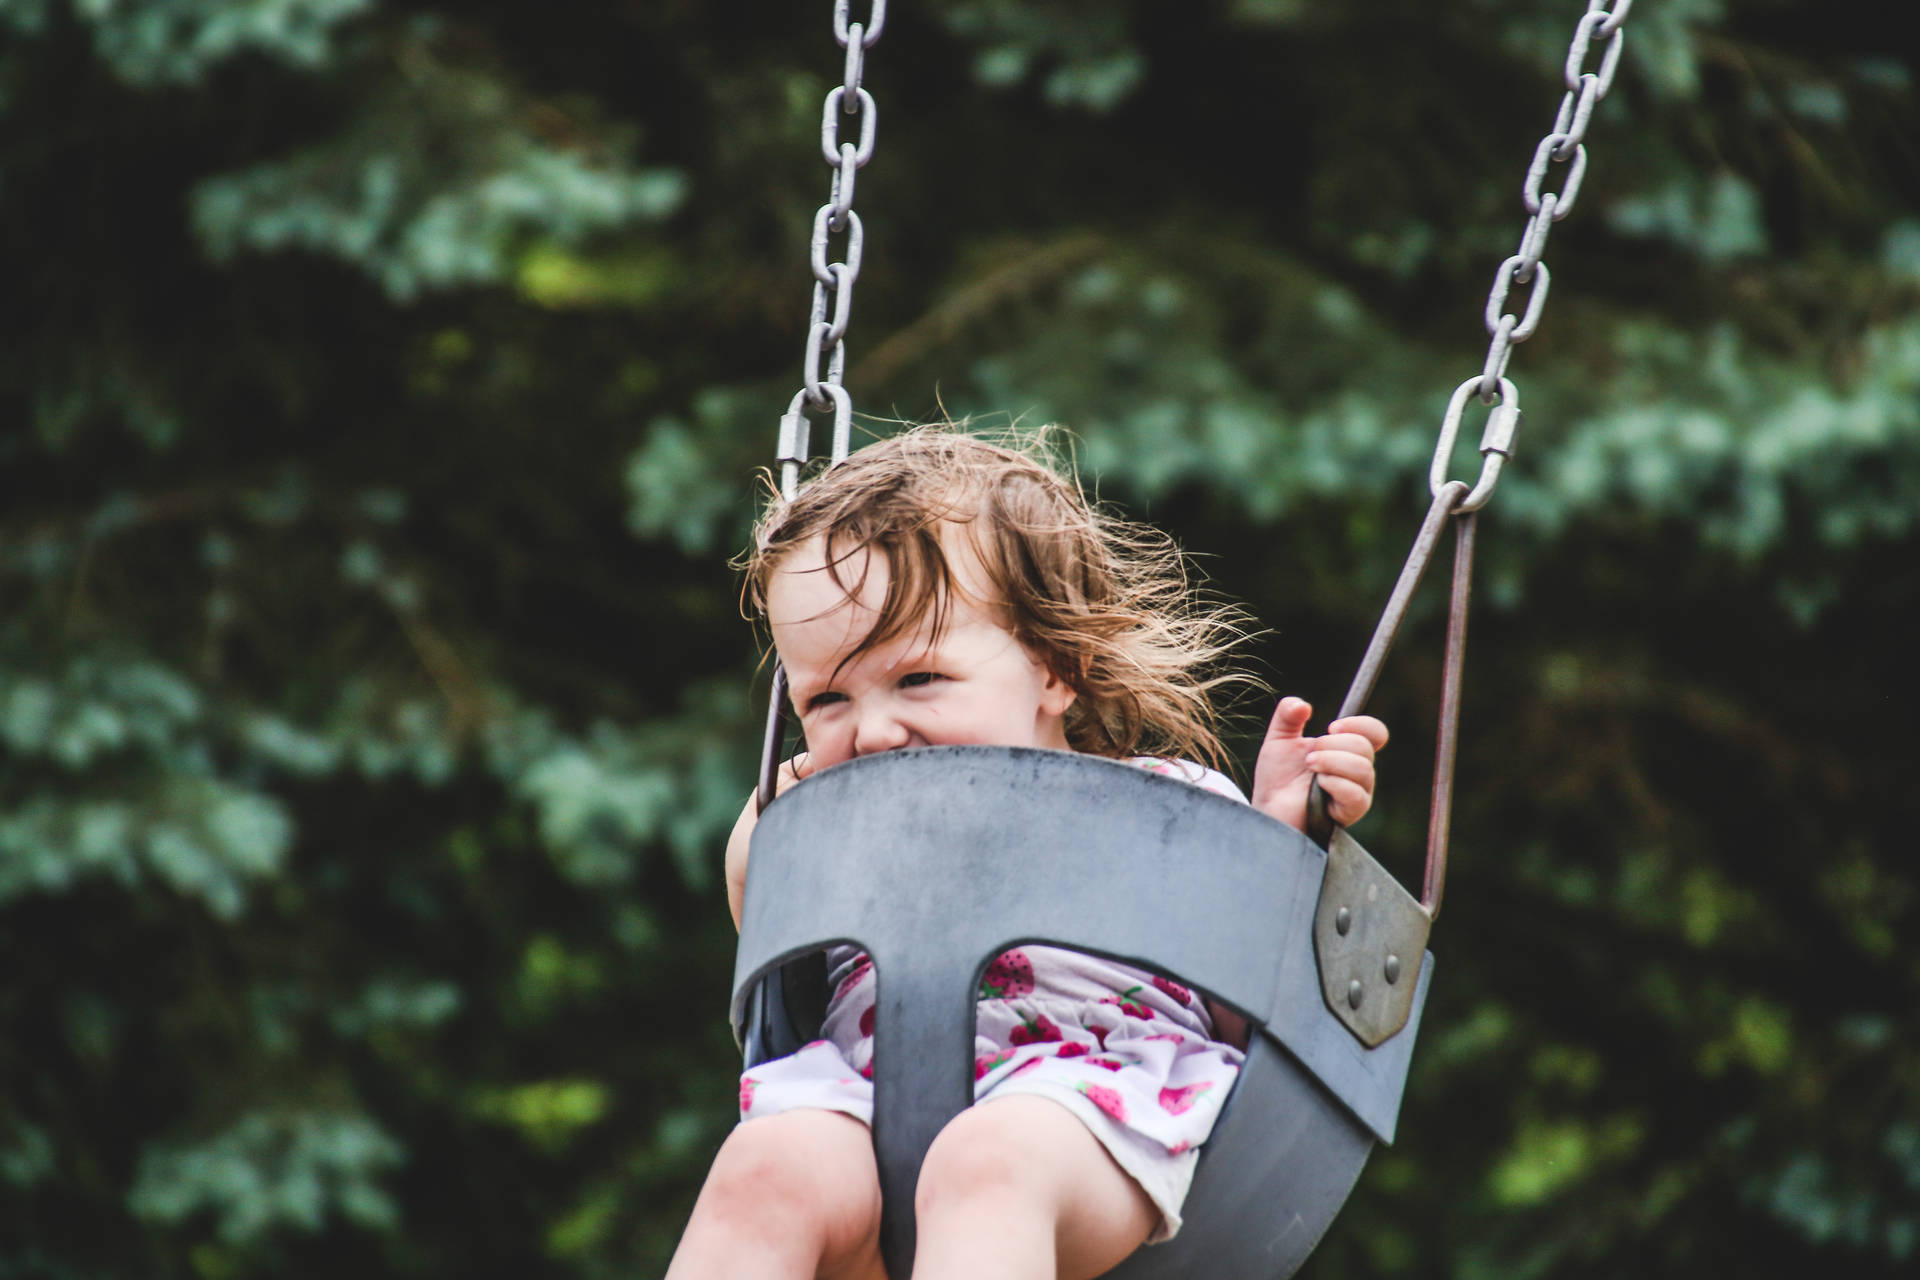 Young Girl On Playground Swing Wallpaper